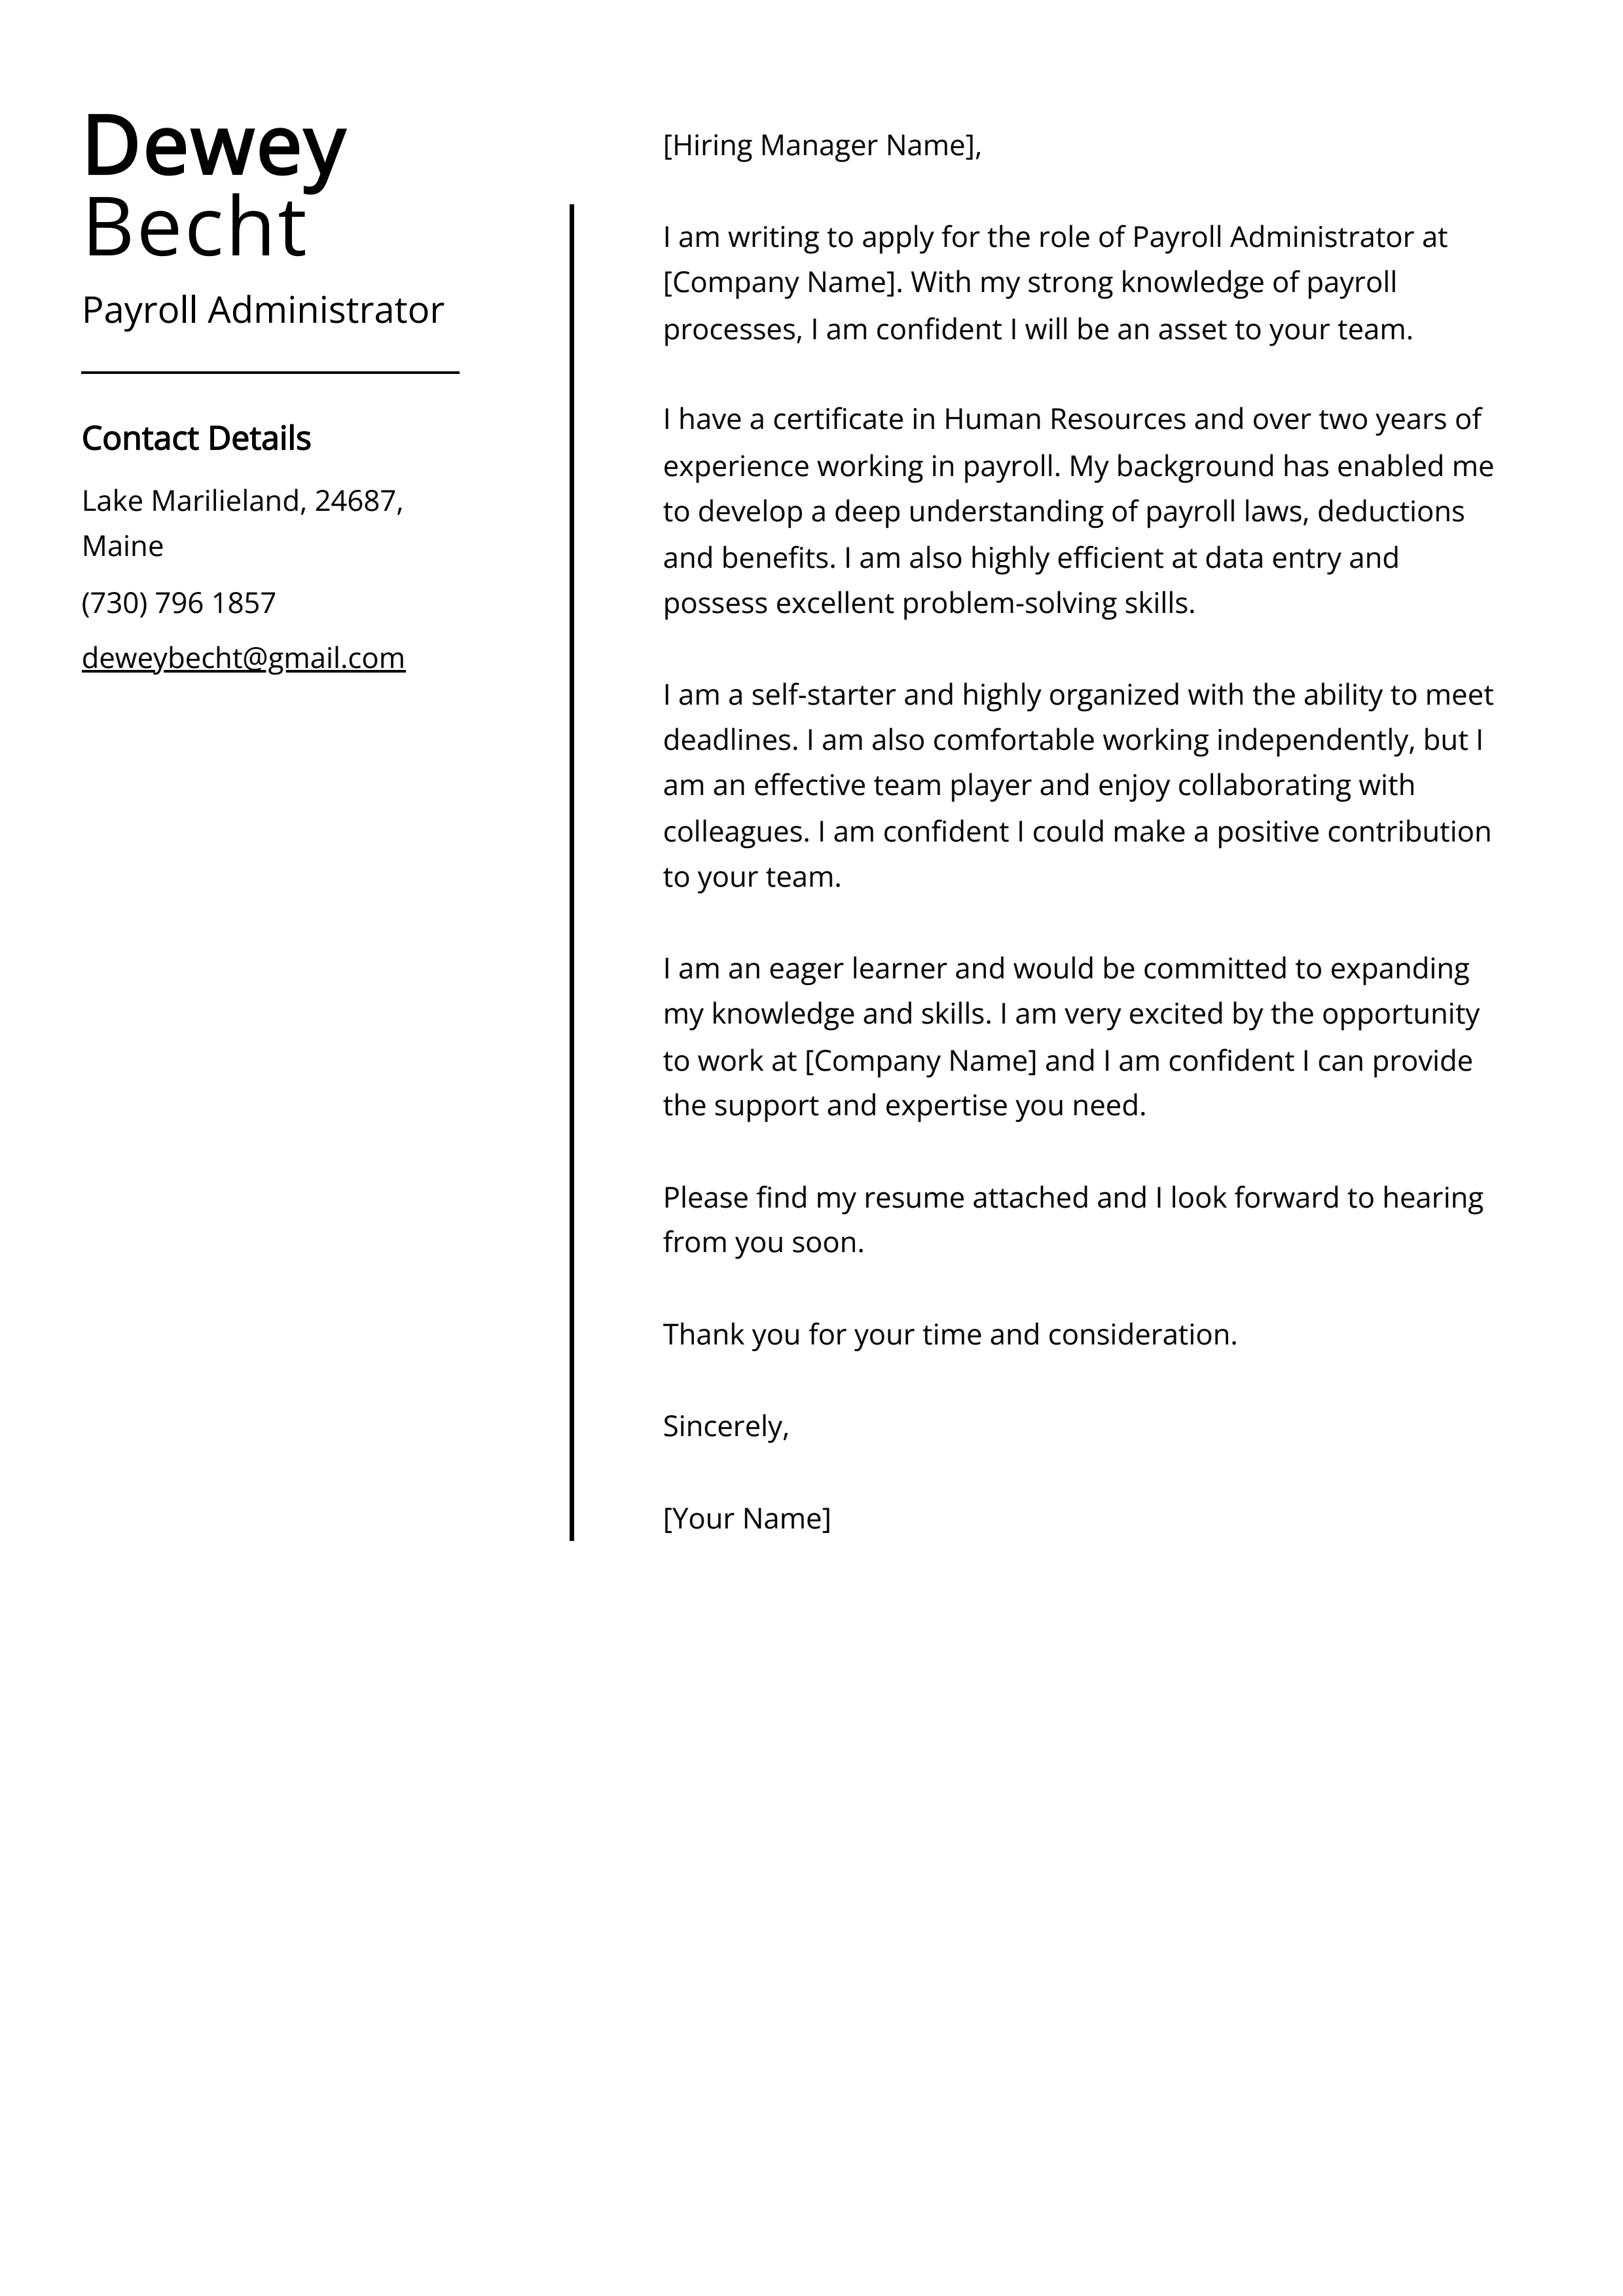 Payroll Administrator Cover Letter Example